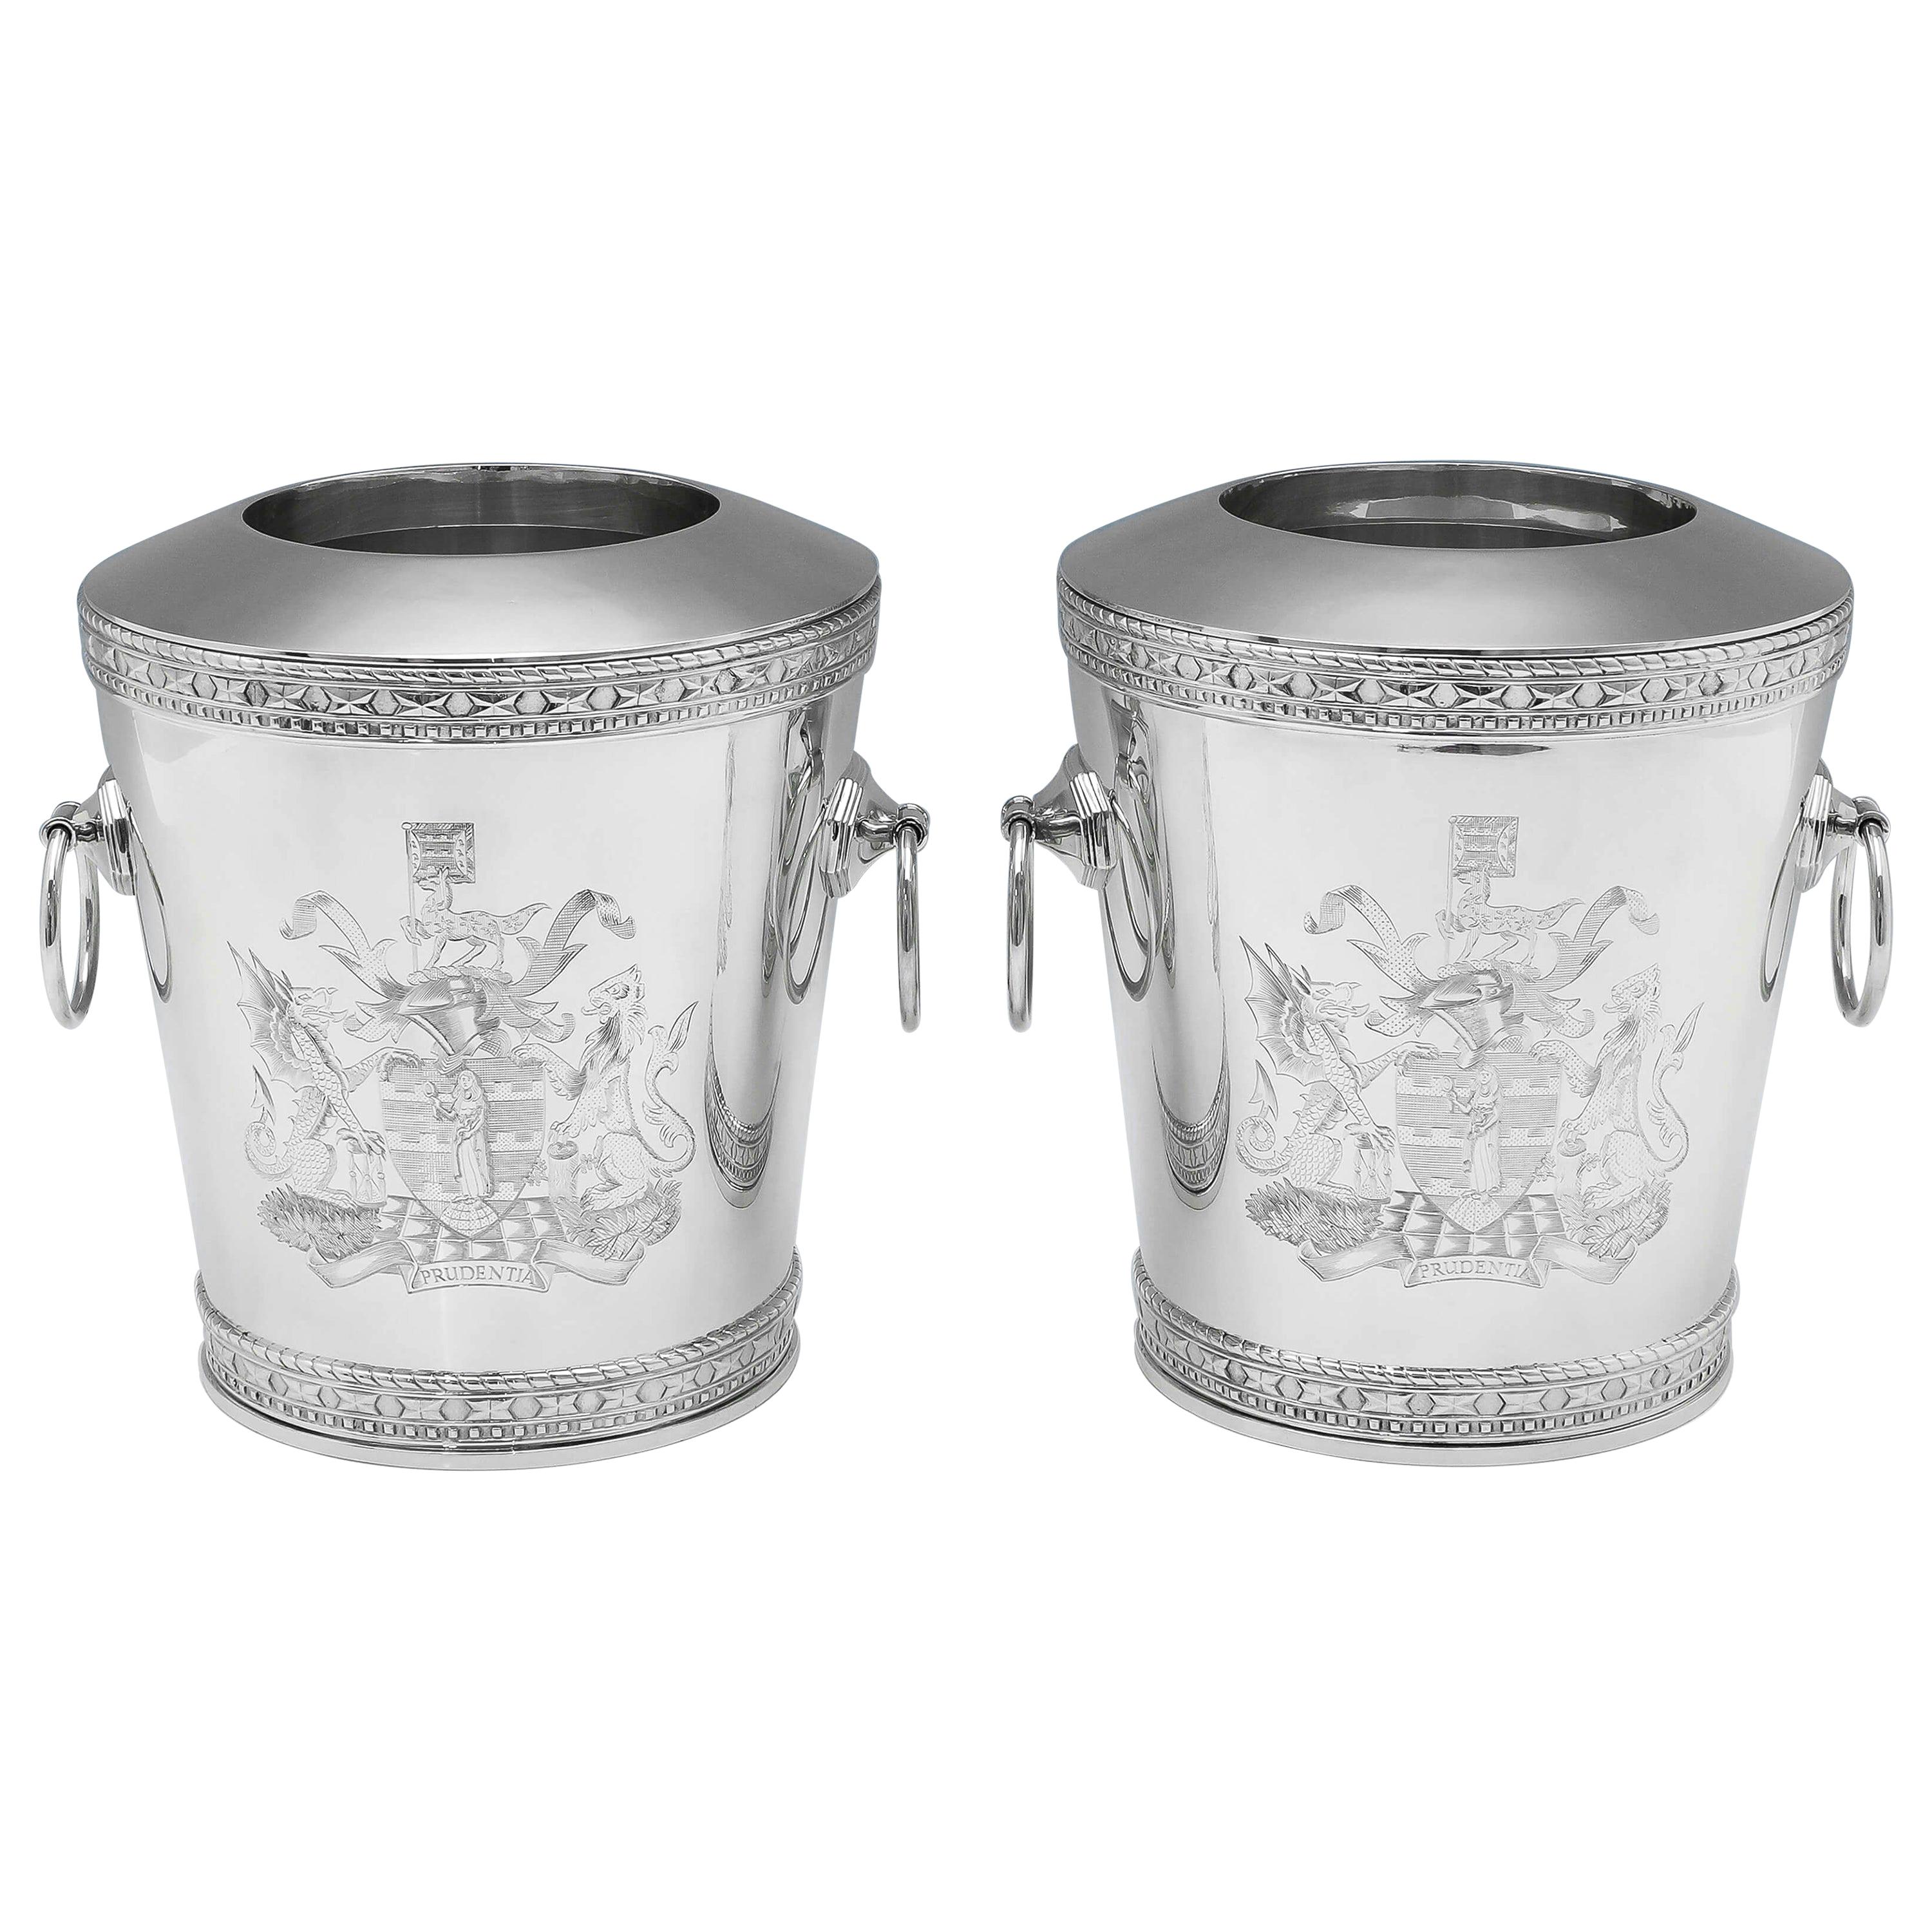 Unique Sterling Silver Pair of Wine Coolers by i. Franks in 1995 for Prudential For Sale